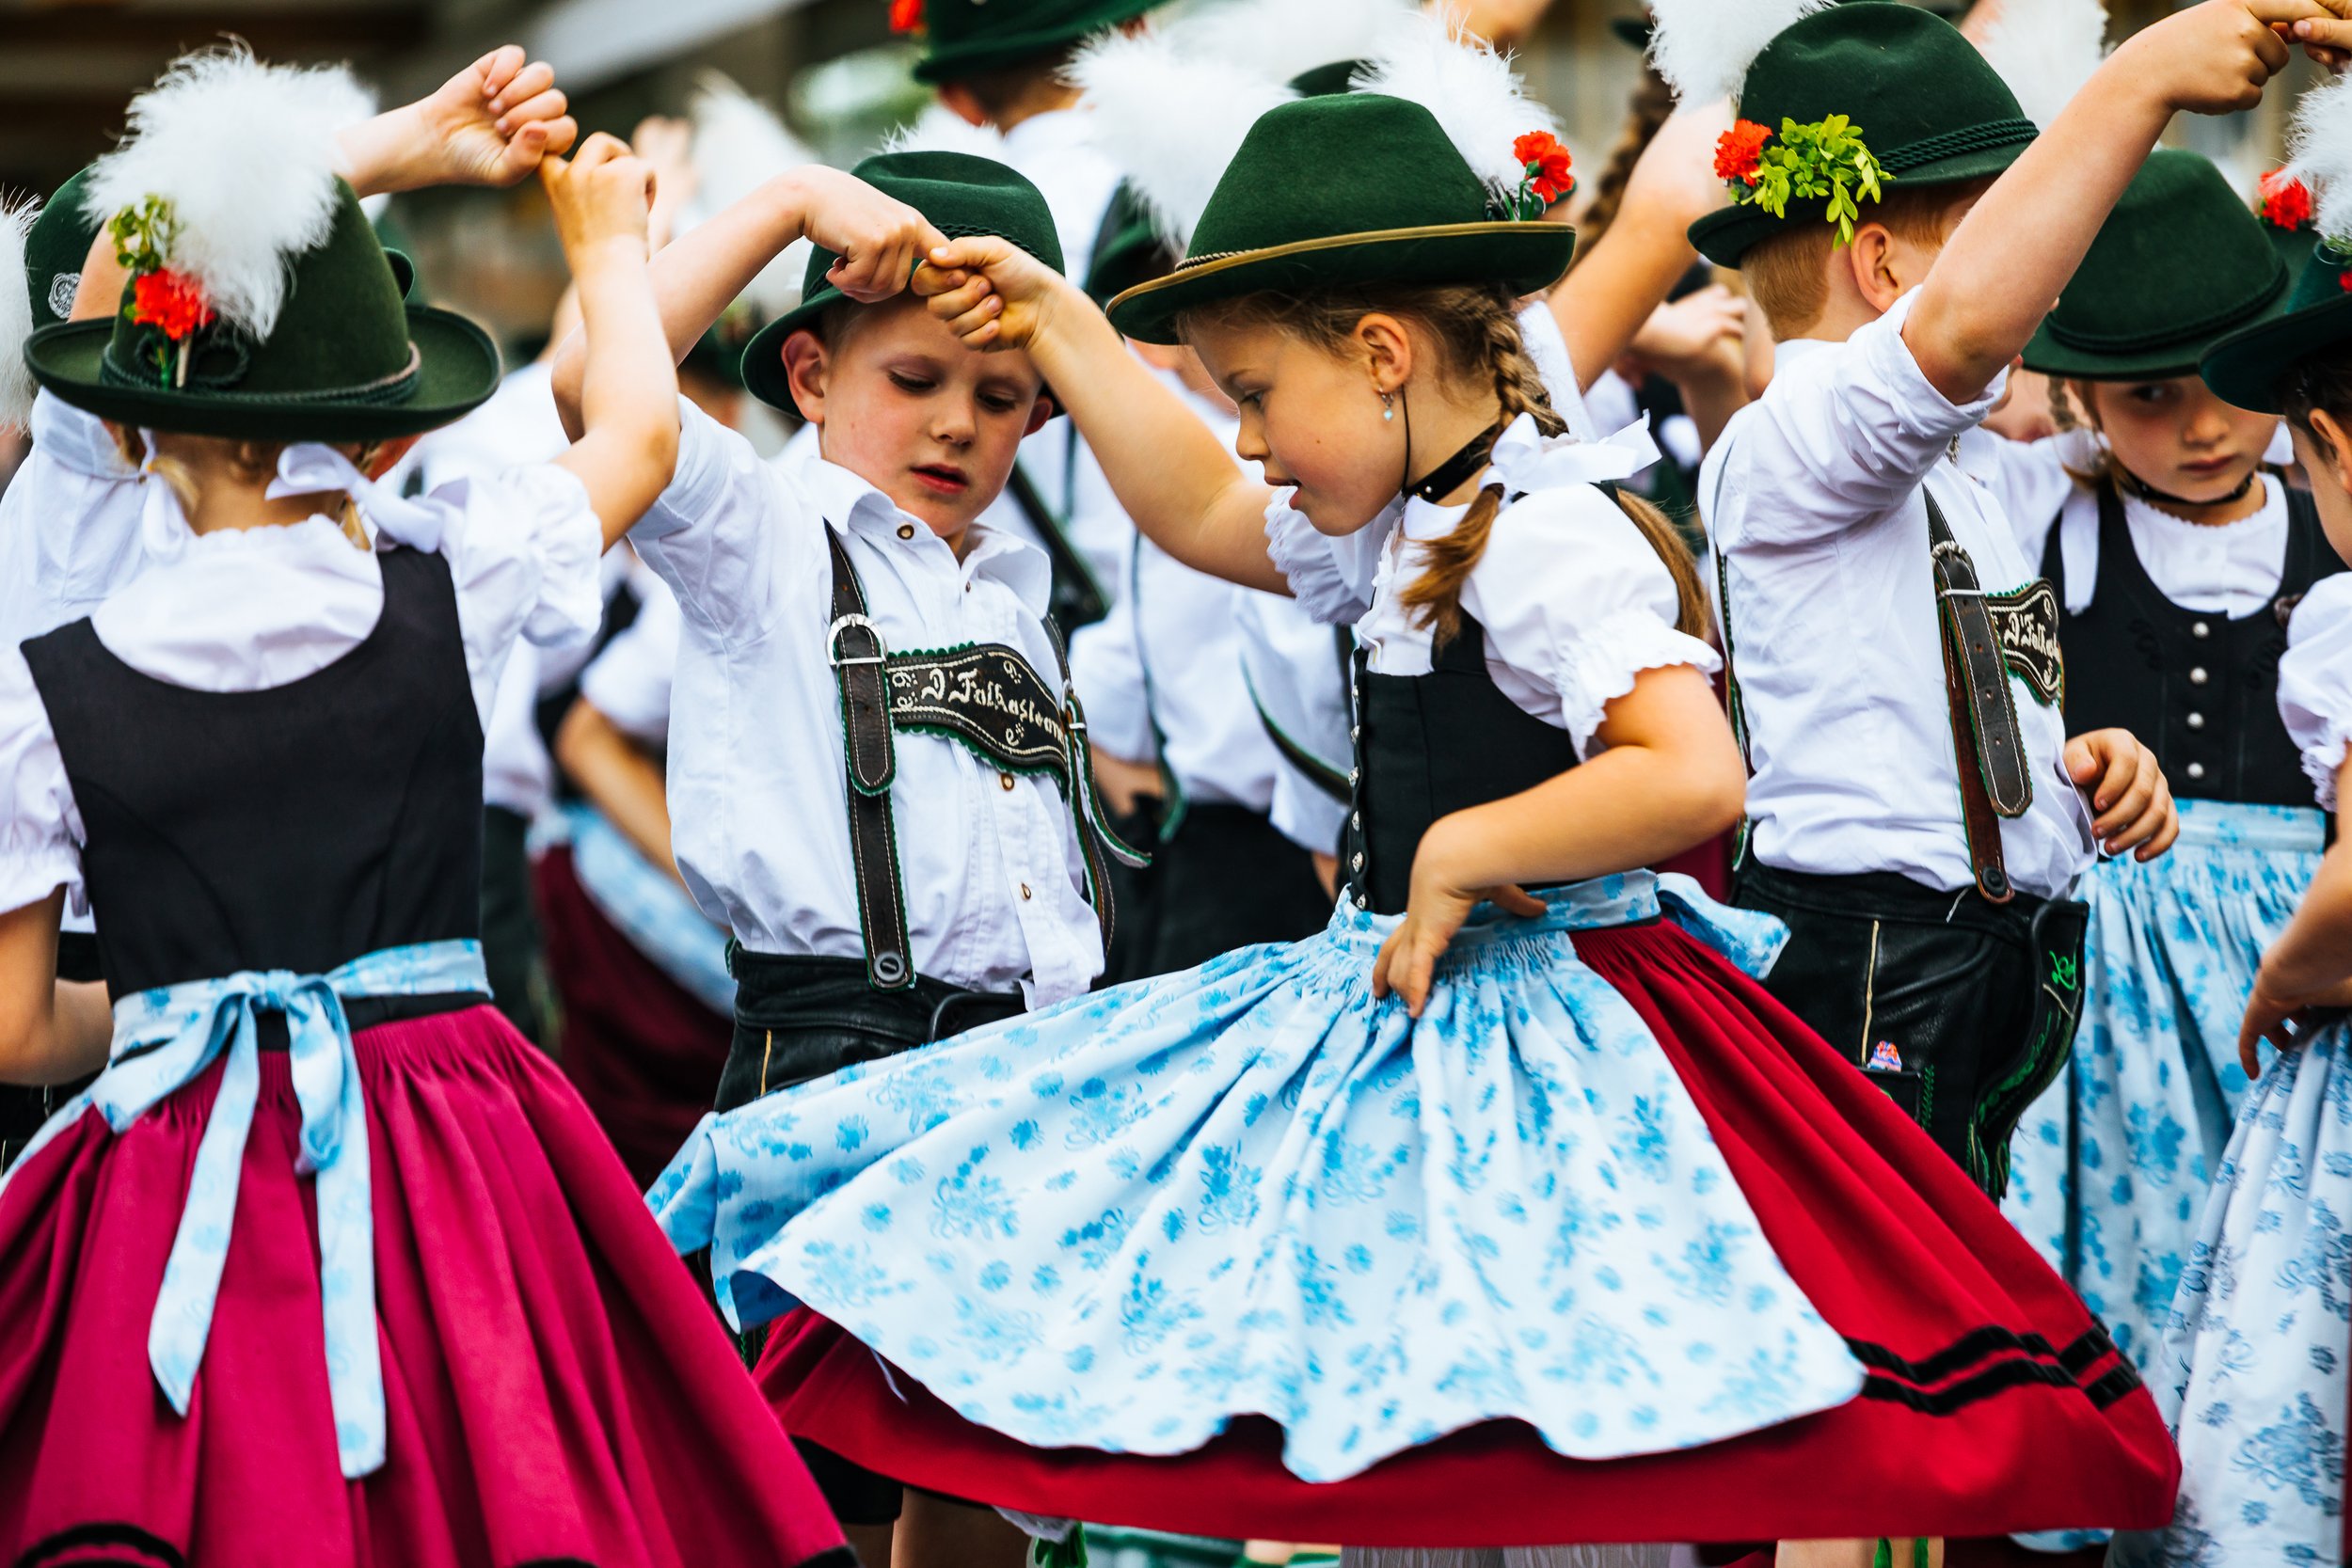 Dancing girls at the Whitsun Festival in Inzell